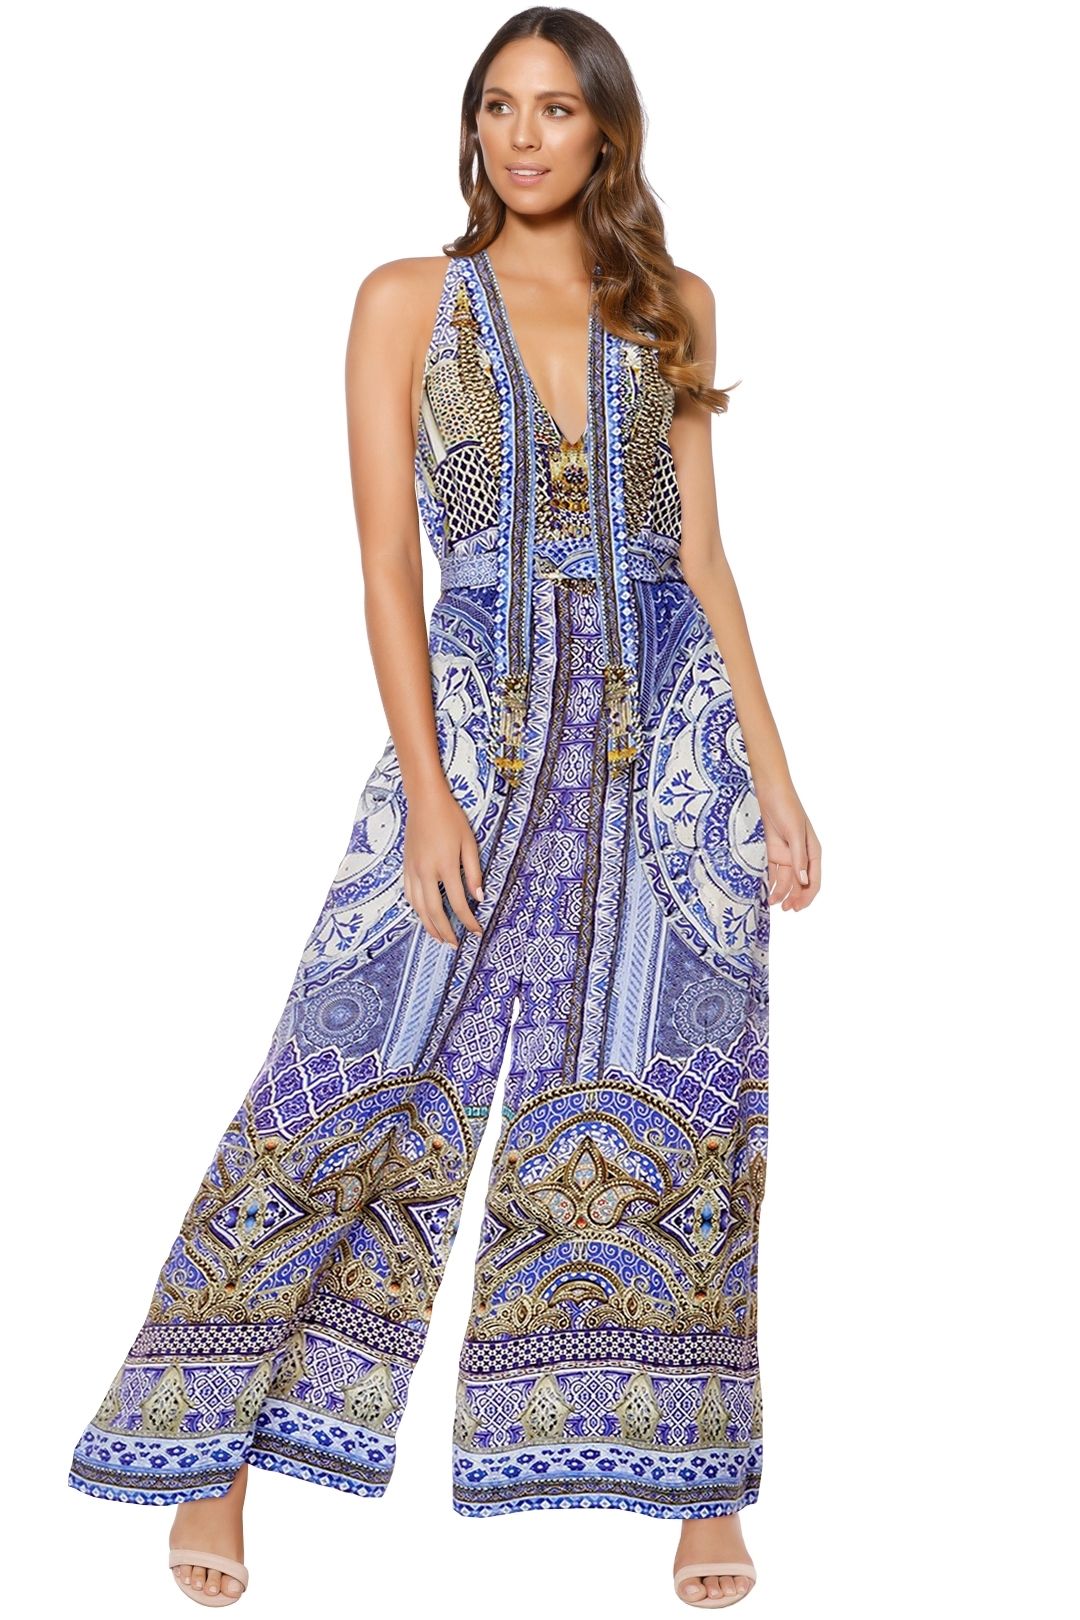 Camilla - It Was All A Dream Keyhole Front Jumpsuit - Prints - Front